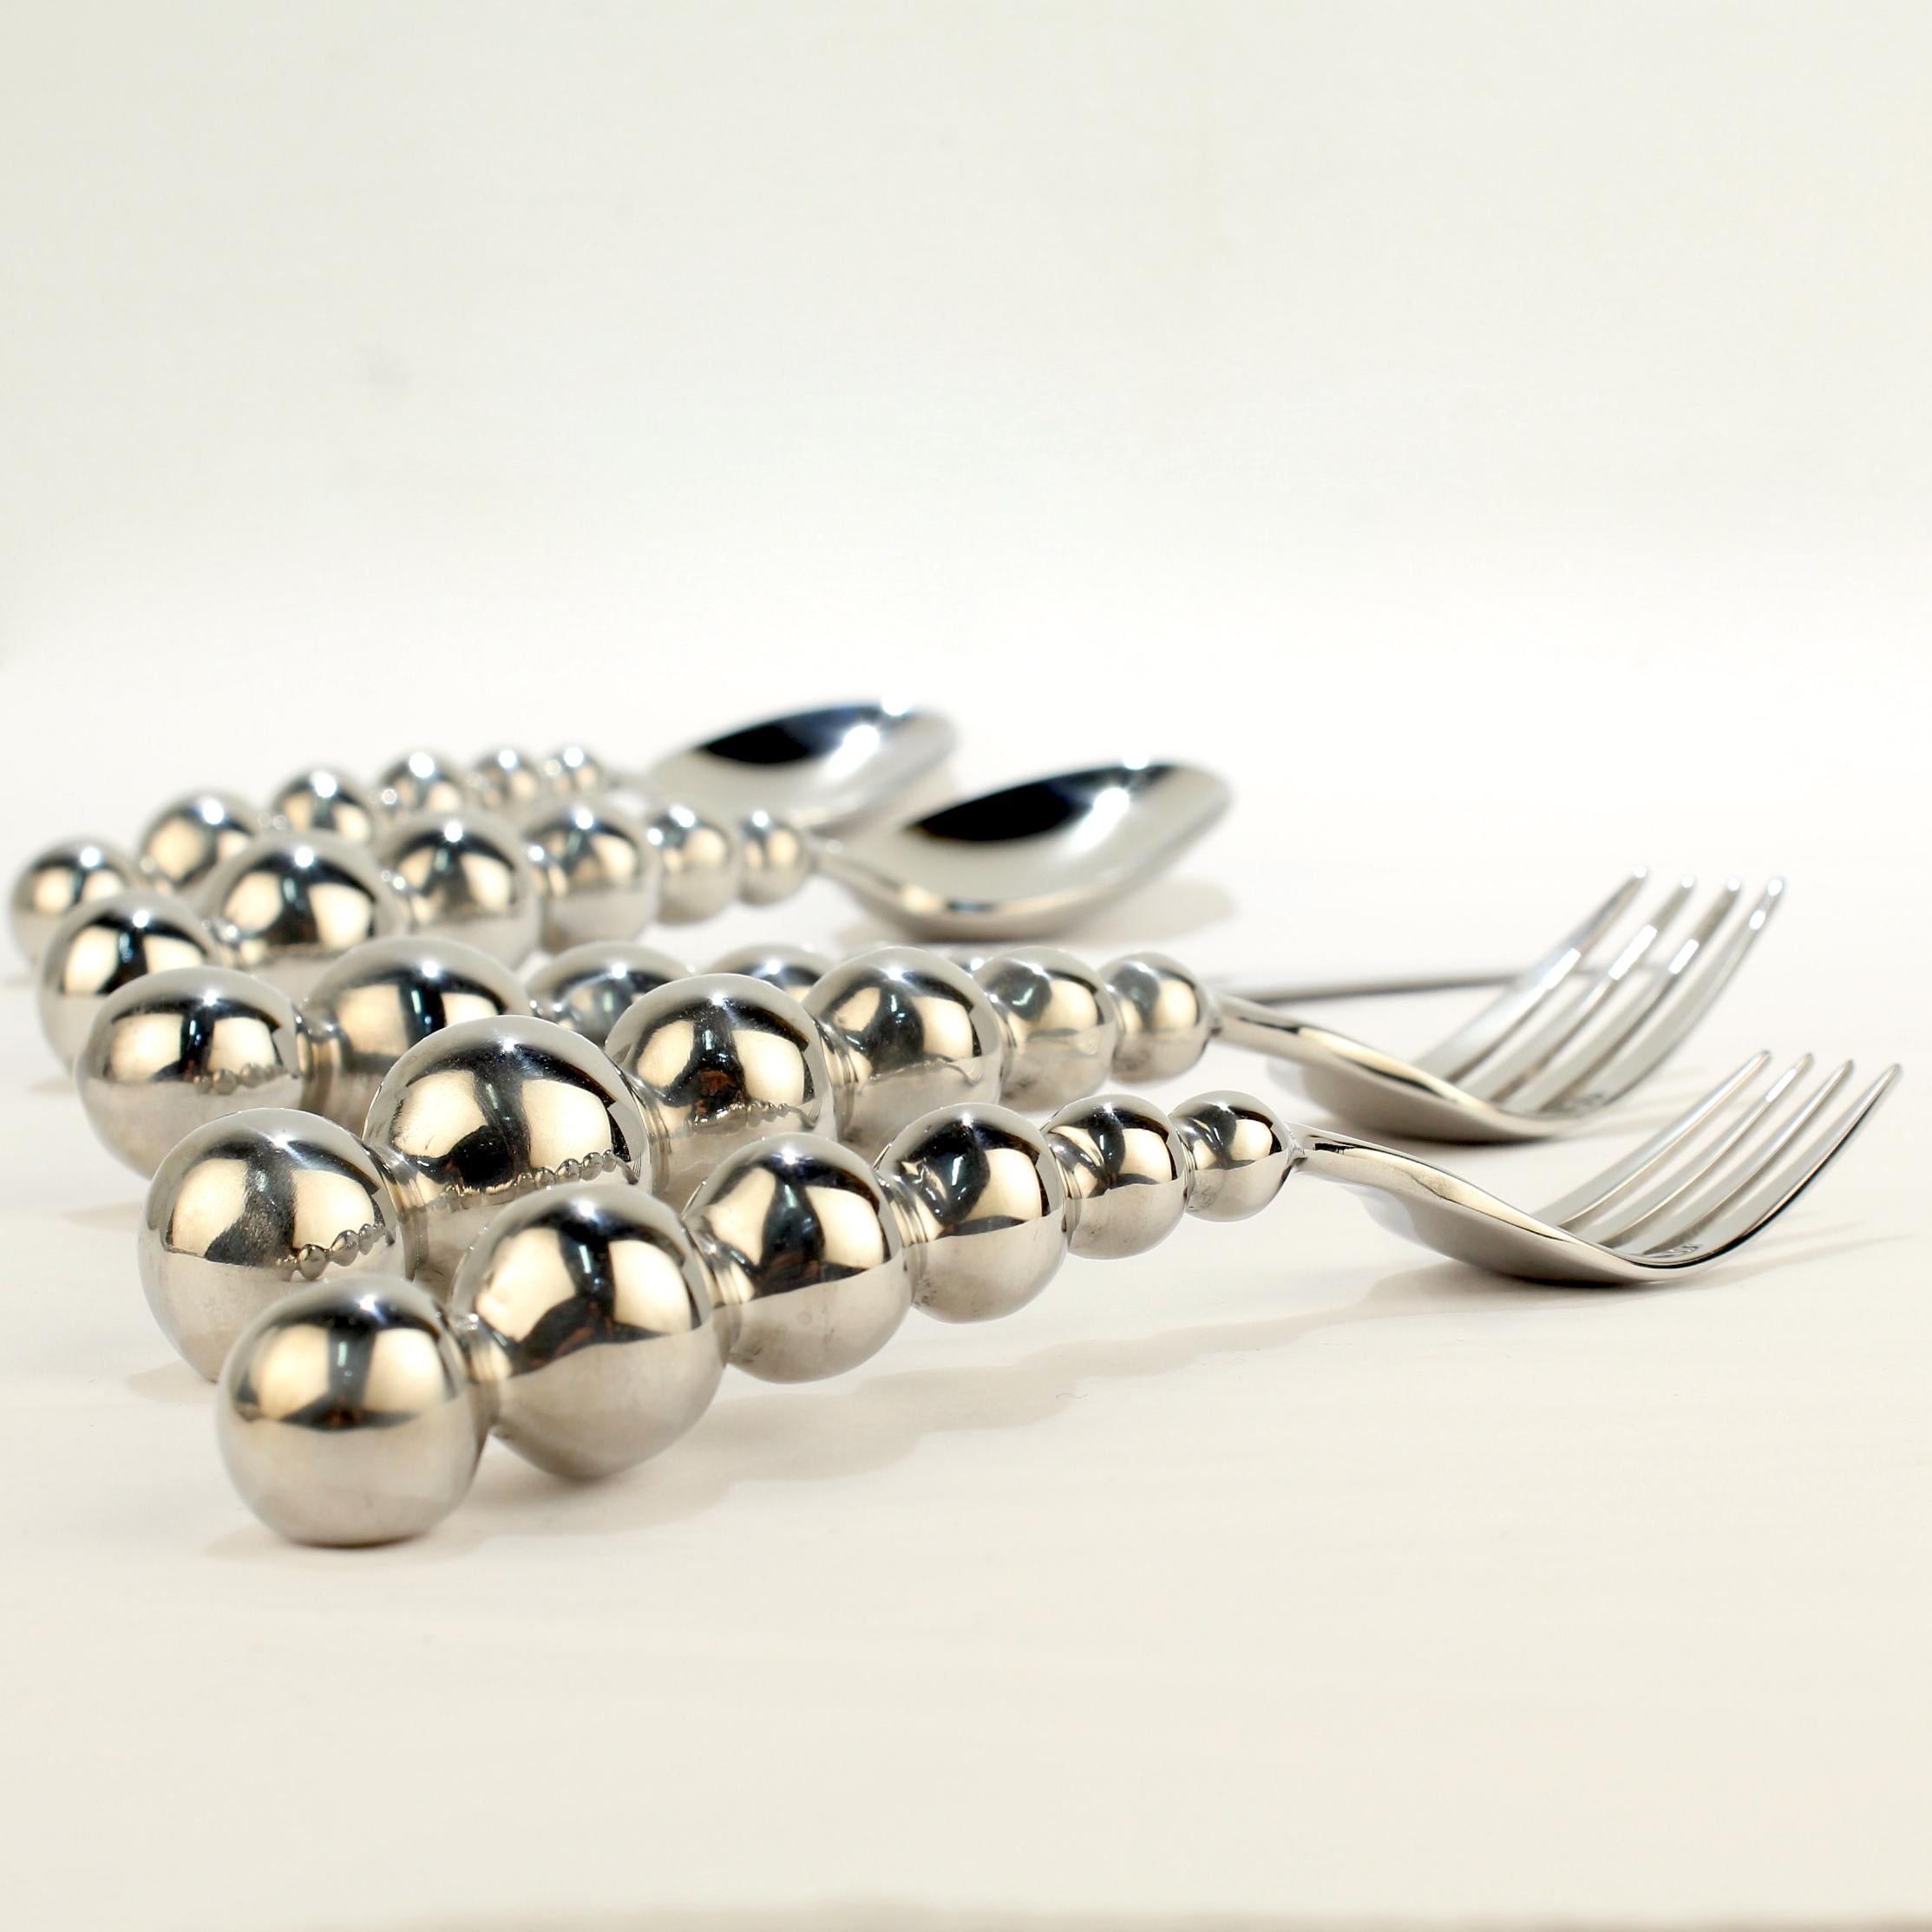 Korean 60 Pc Space Age Galaxy Pattern Stainless Steel Flatware Set by Cambridge for 12